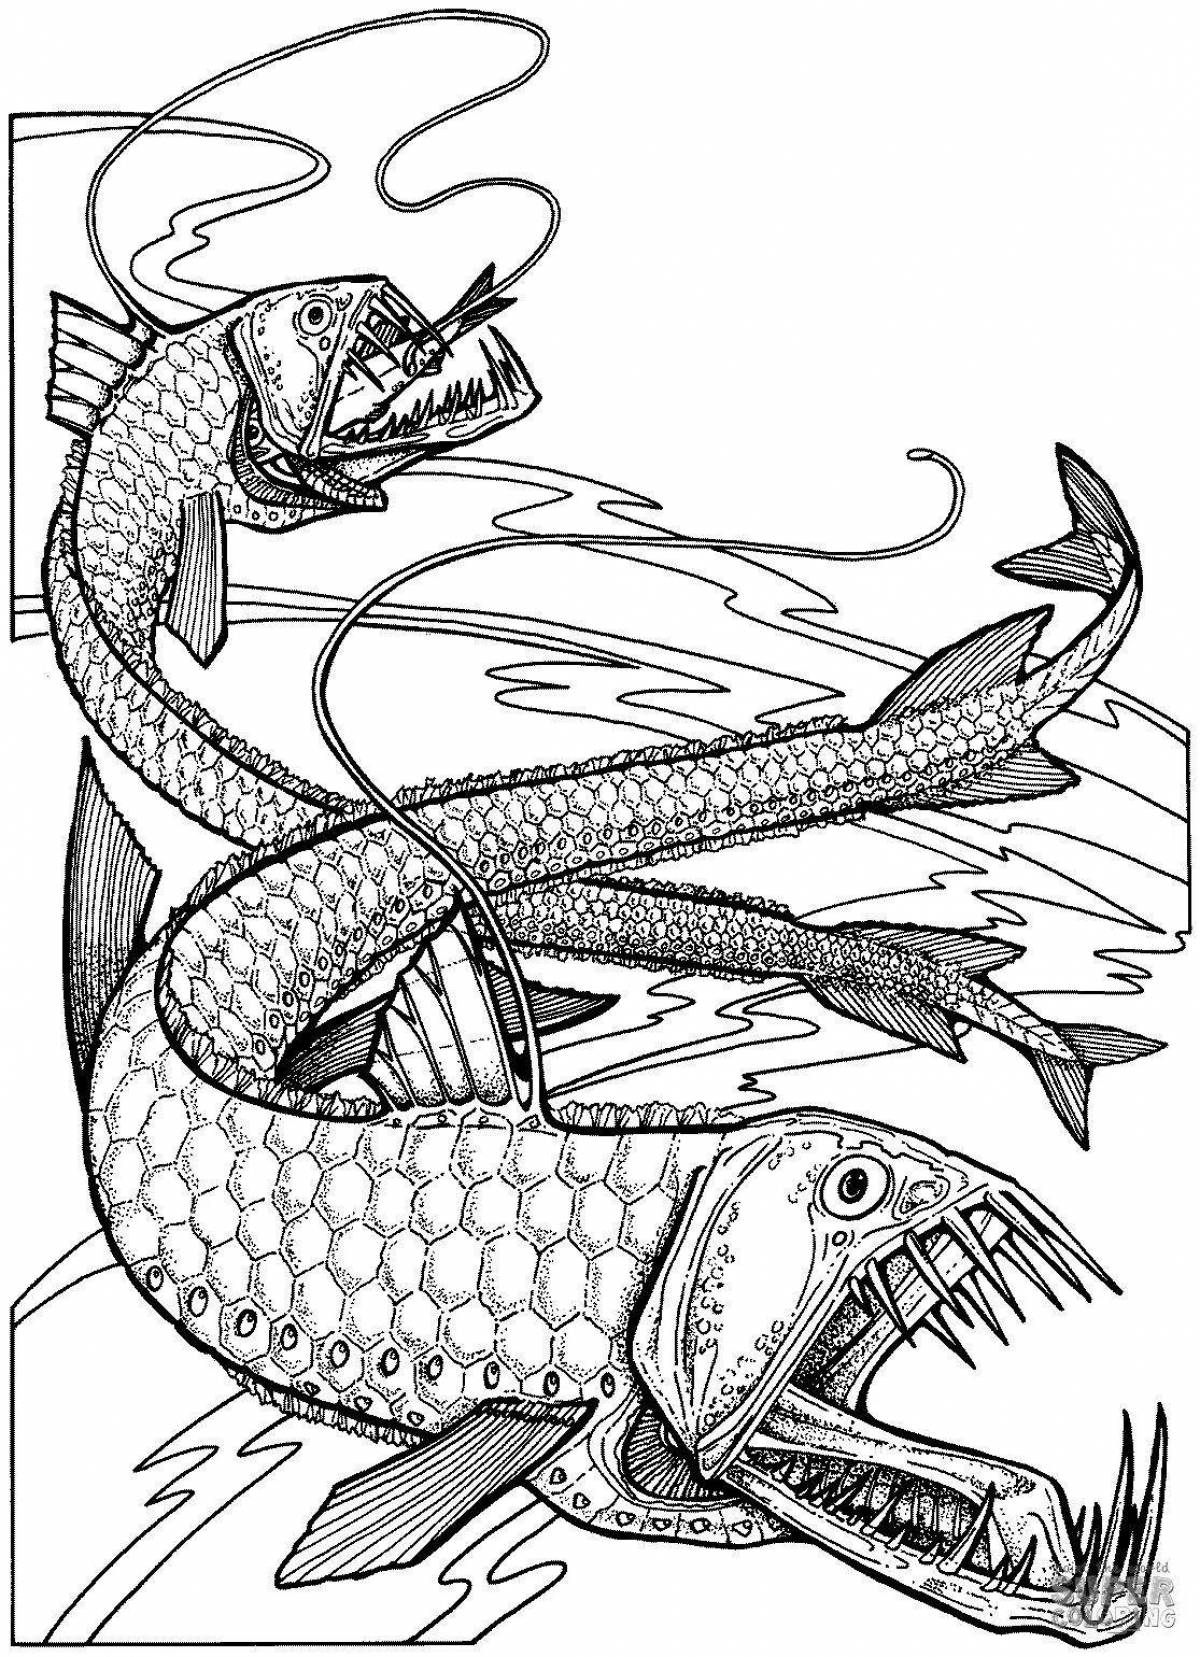 Exotic sea monster coloring page